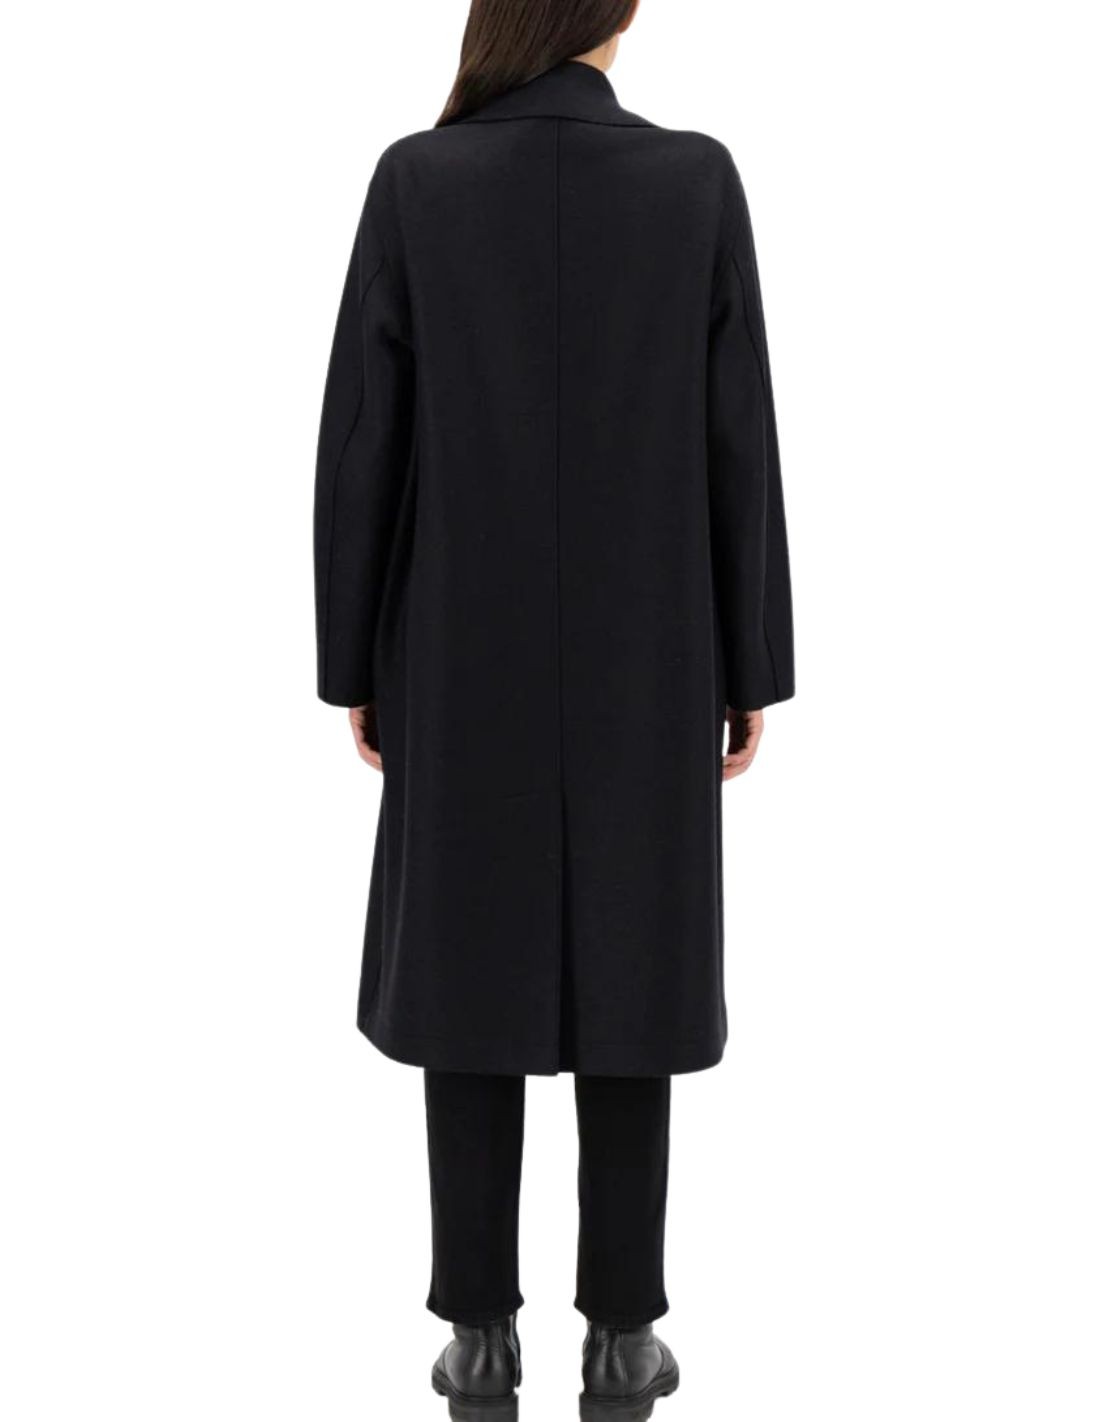 Black sailor coat pressed wool and polaire HARRIS WHARF LONDON - FW22